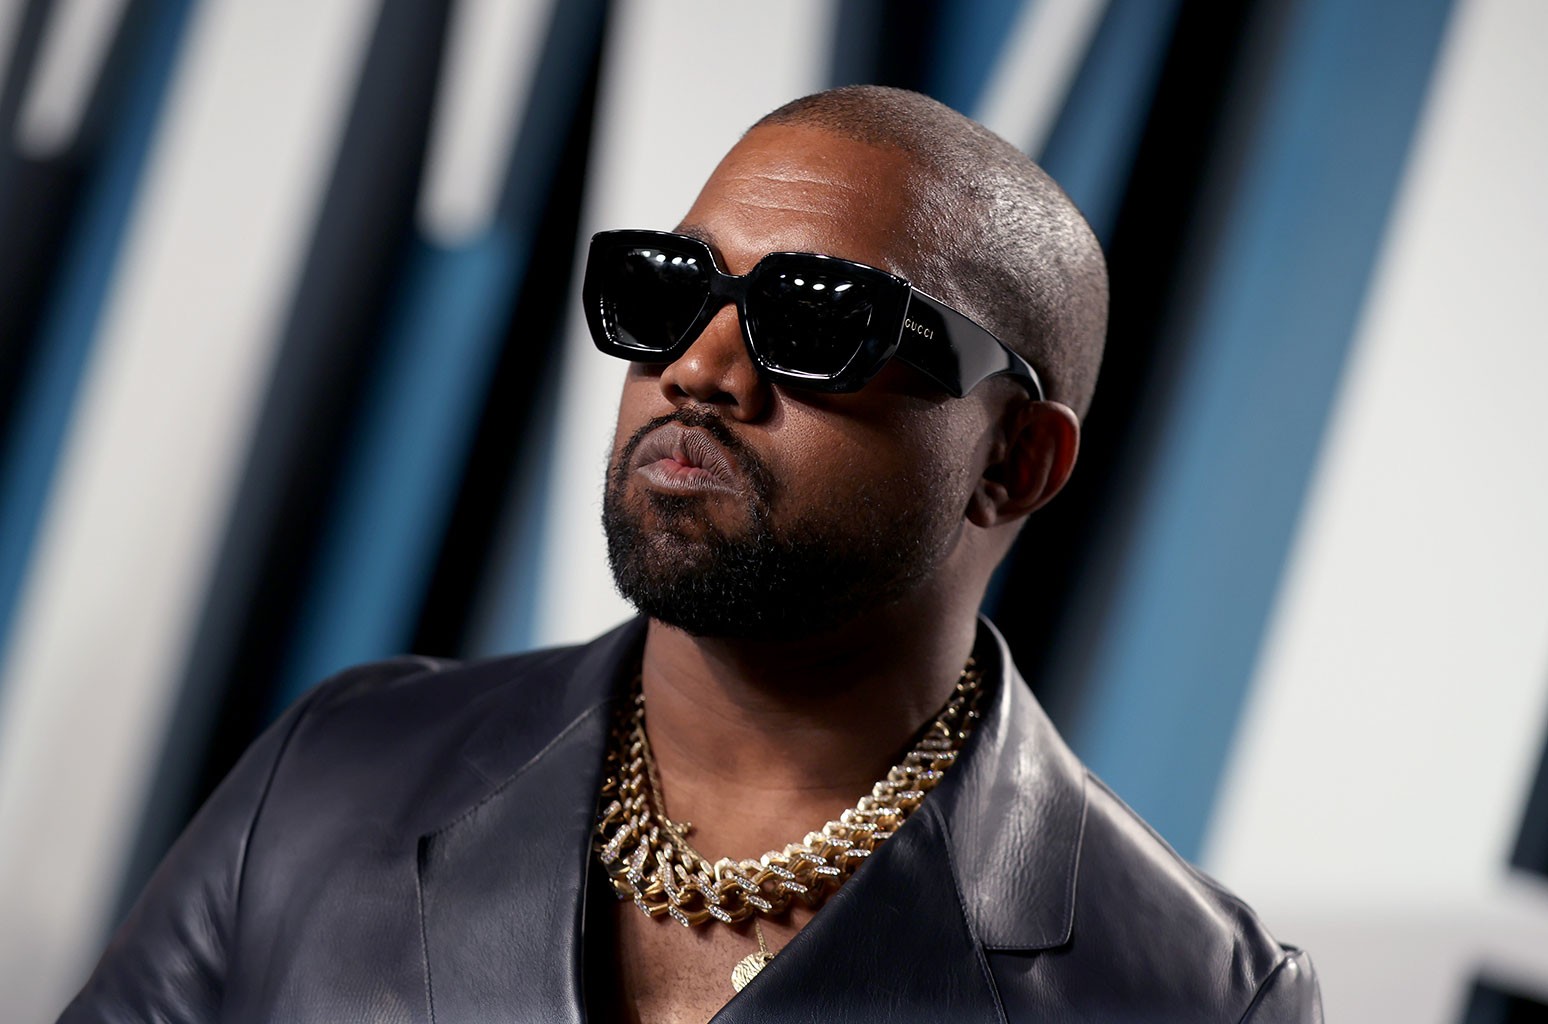 Kanye West’s Donda debuts at No. 1 in the greatest week for any album in 2021